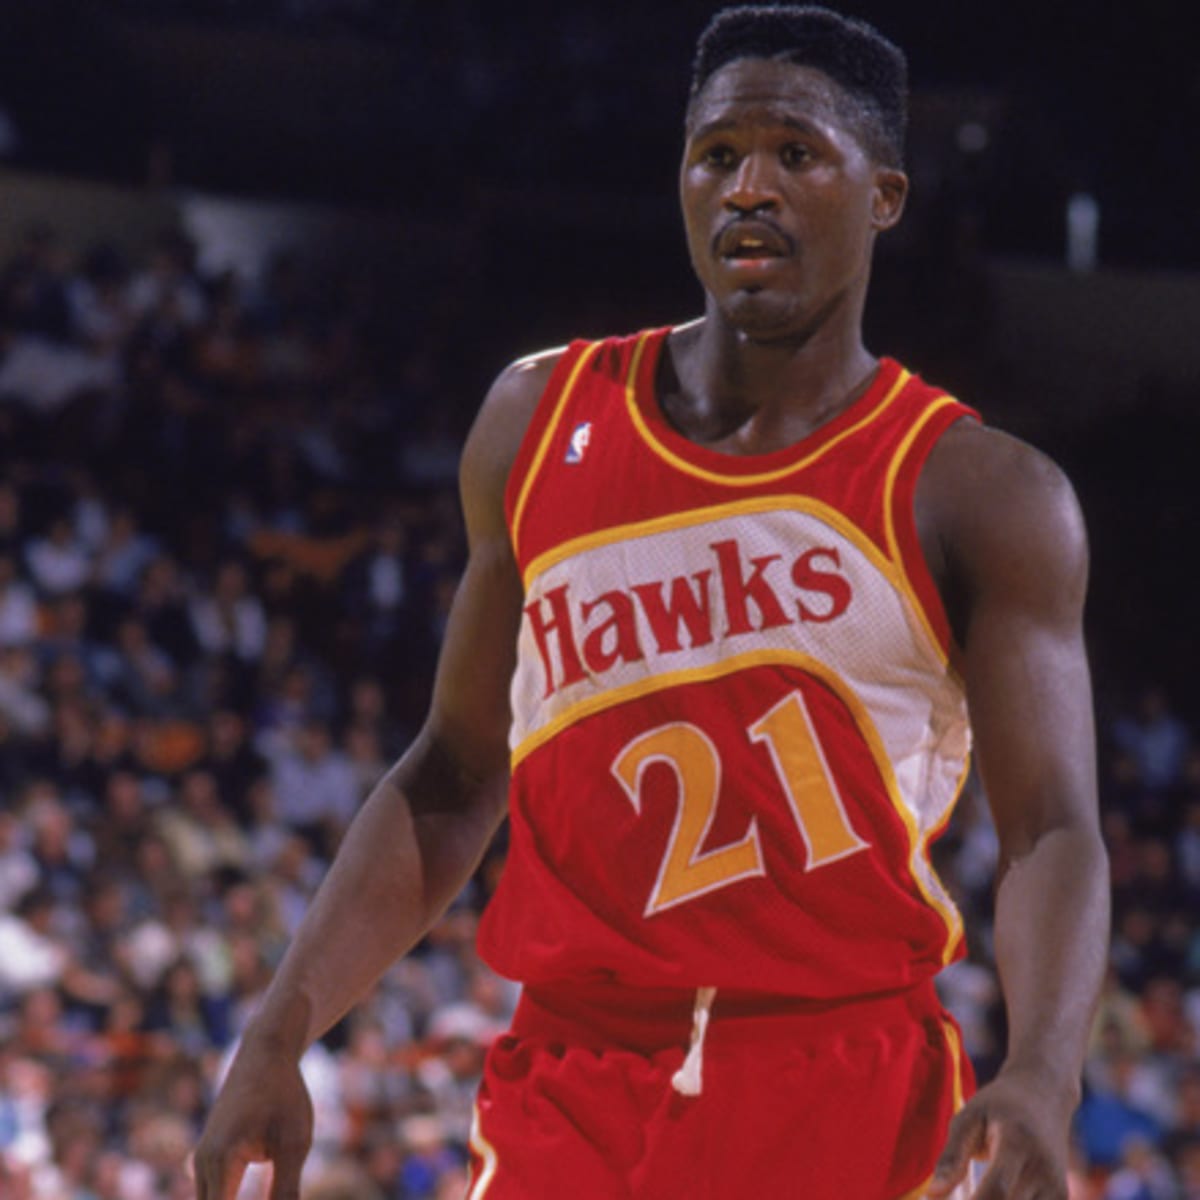 The Story of Dominique Wilkins